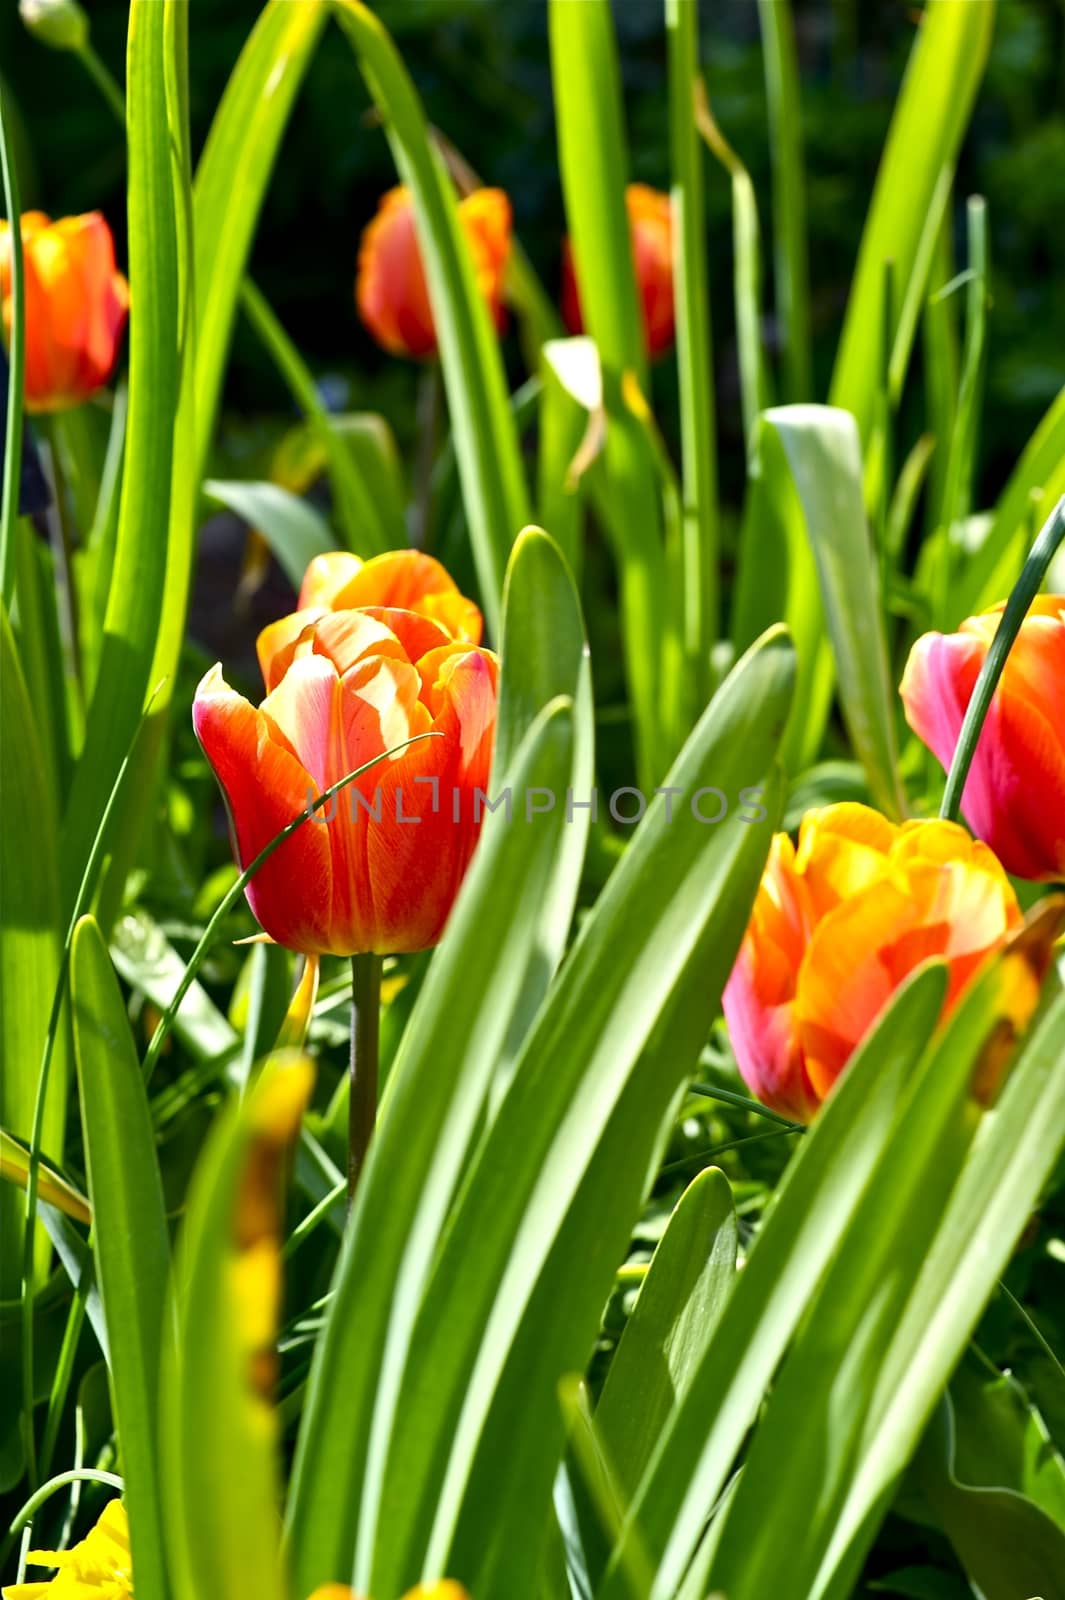 Tulips in Garden by welcomia